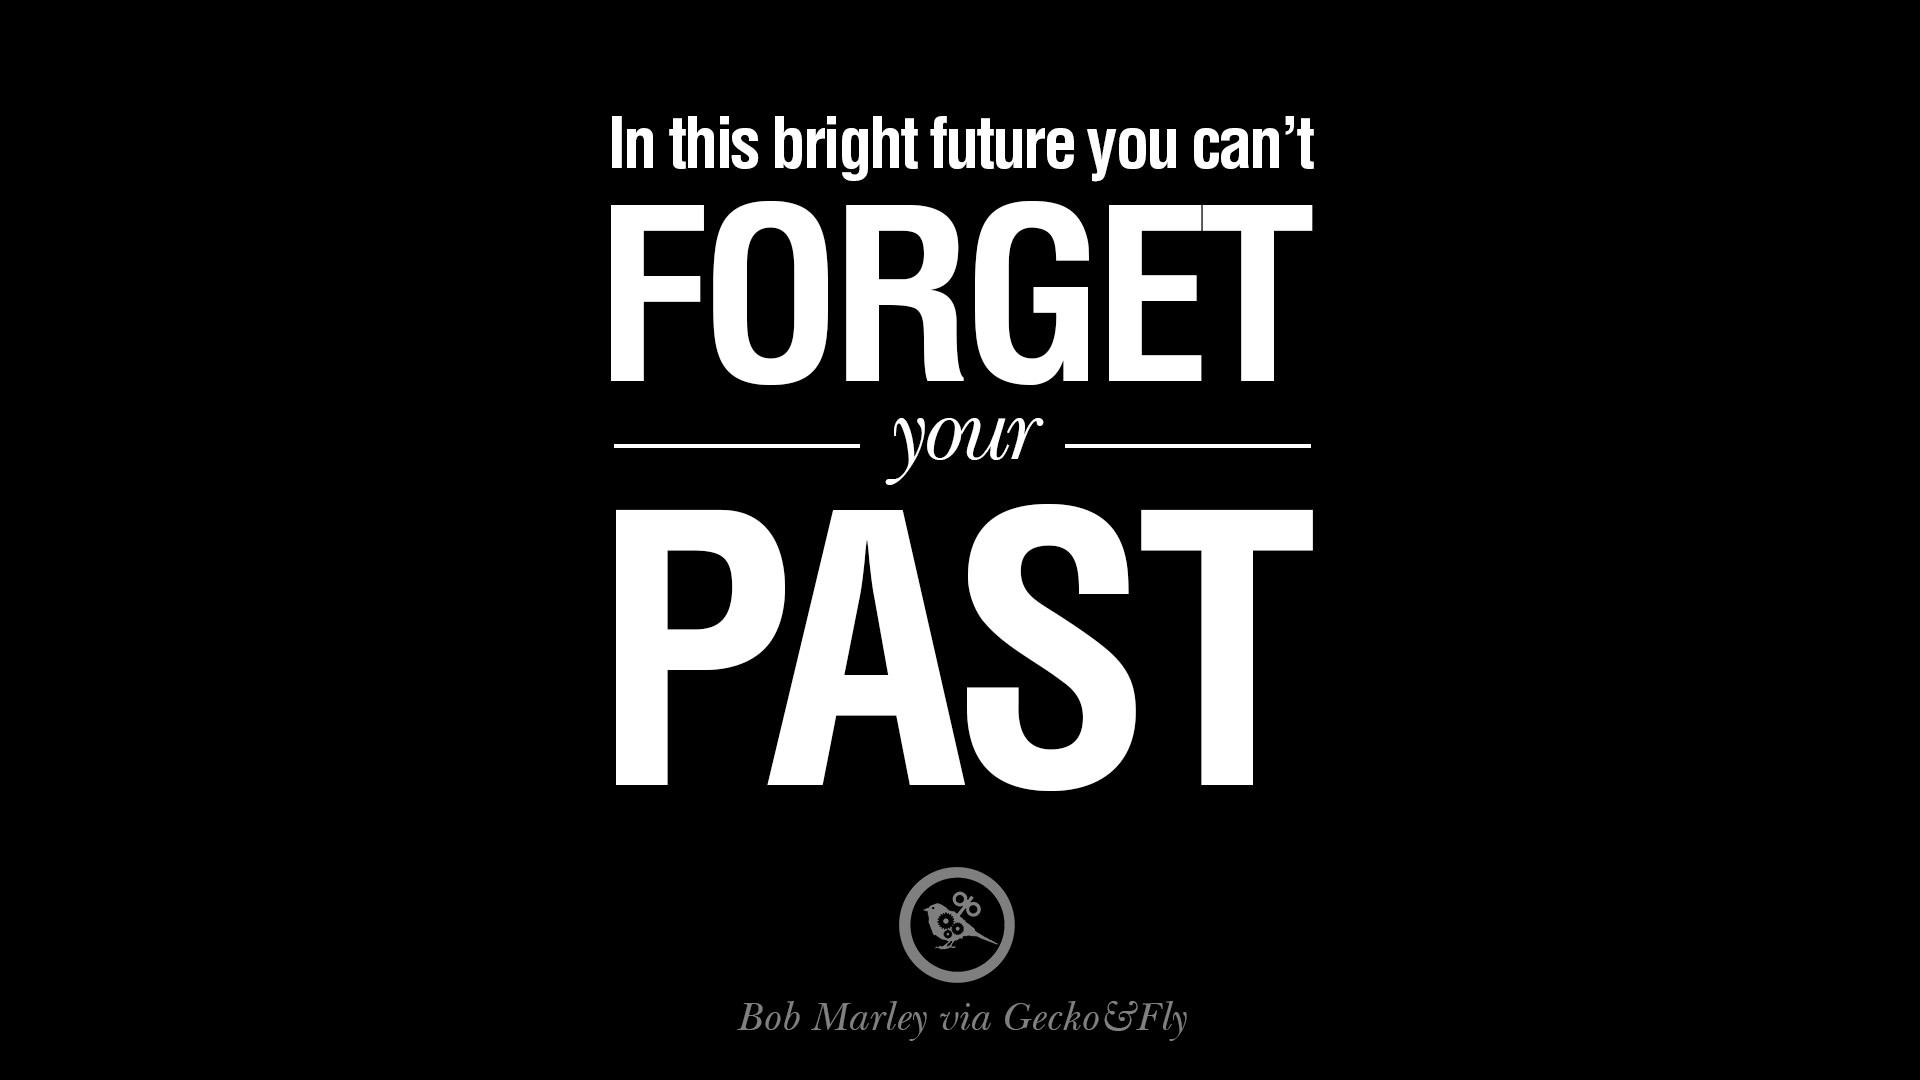 1920x1080 In this bright future you can't forget your past. – Bob Marley